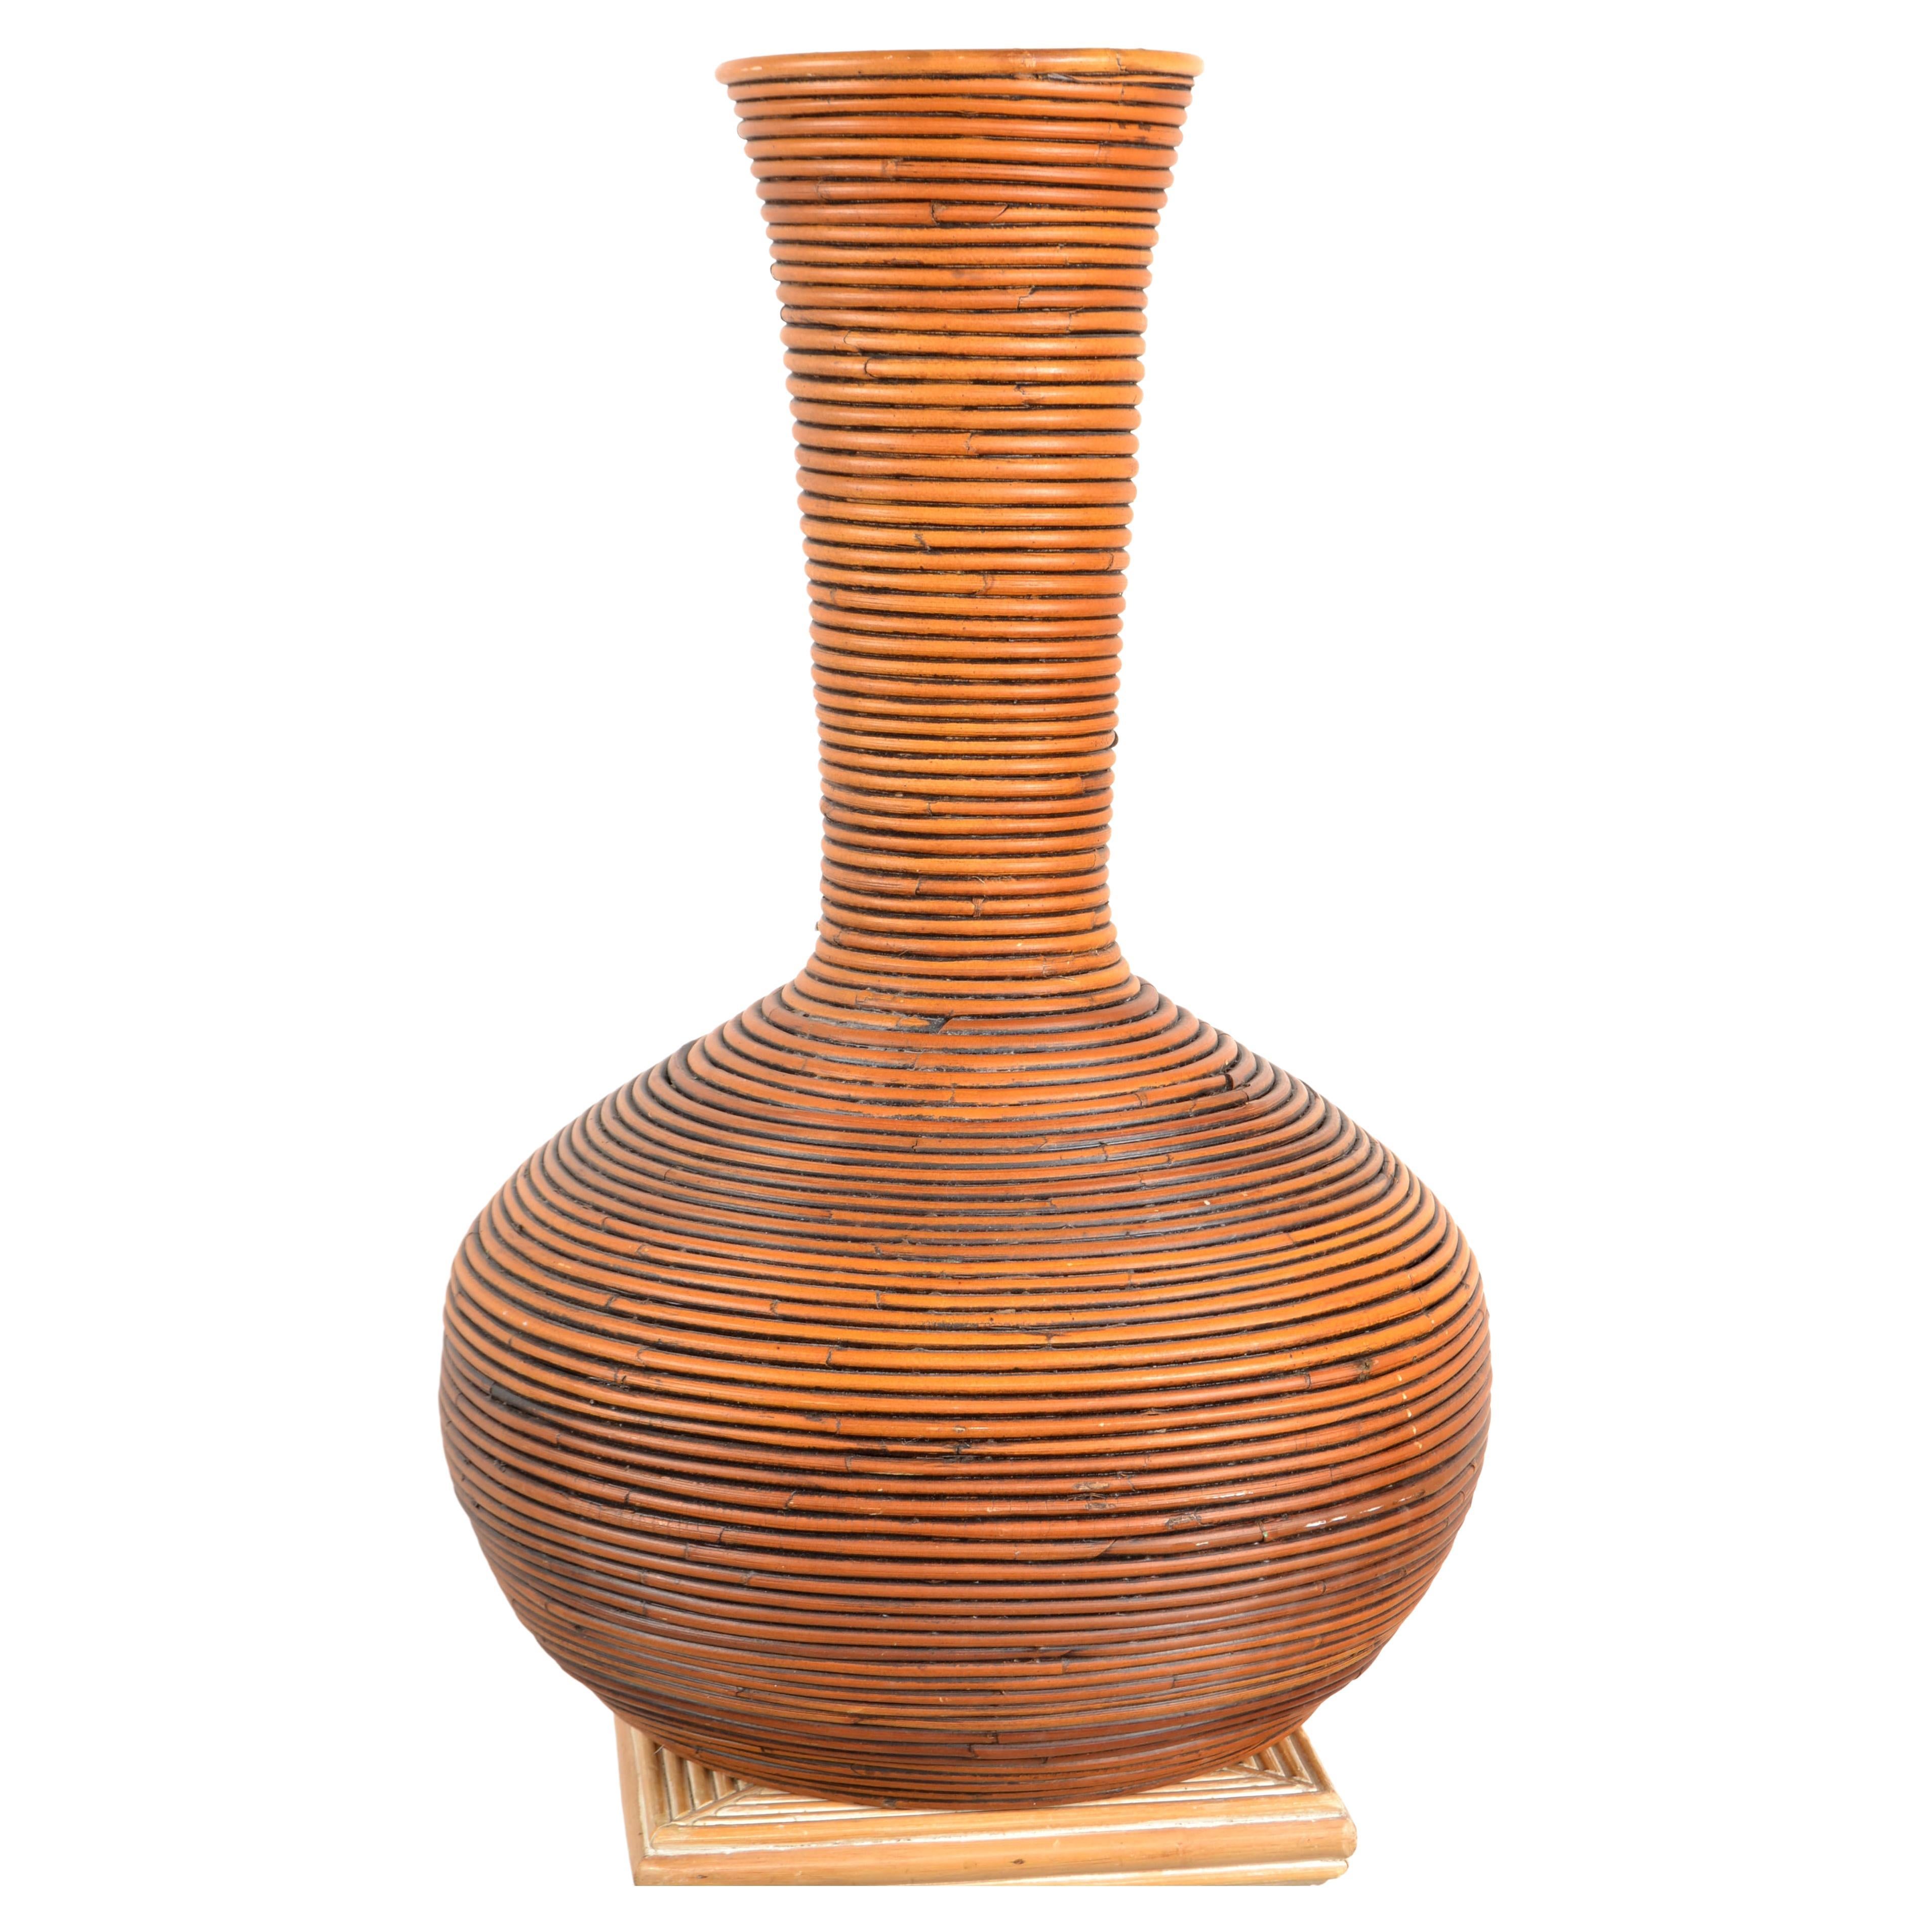 Handcrafted tall boho chic brown pencil reed, cane and bamboo floor vase in cone shape.
Great Mid-Century Modern addition for Your Sunroom.
Measurements:
Top Diameter: 7 inches.
Core Diameter: 14.5 inches.
Height: 24.38 inches.
